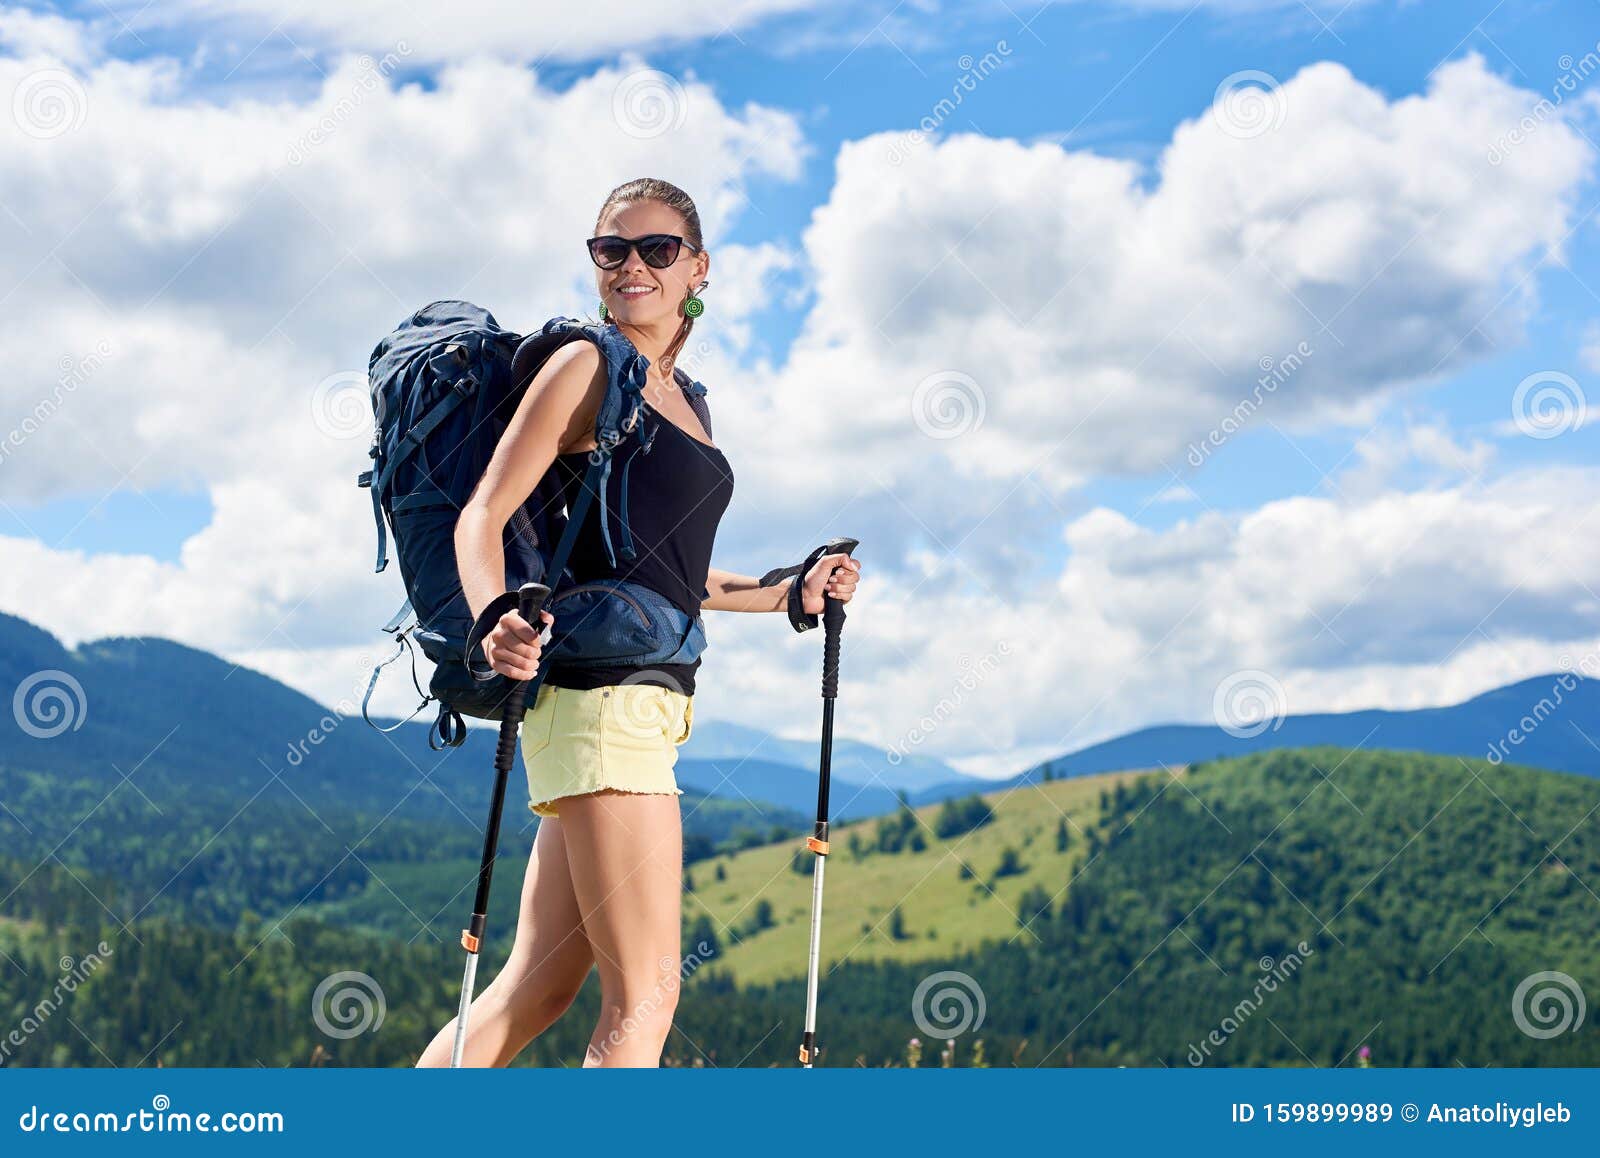 Woman Wearing A Backpack Hiking The Alps. Stock Images 